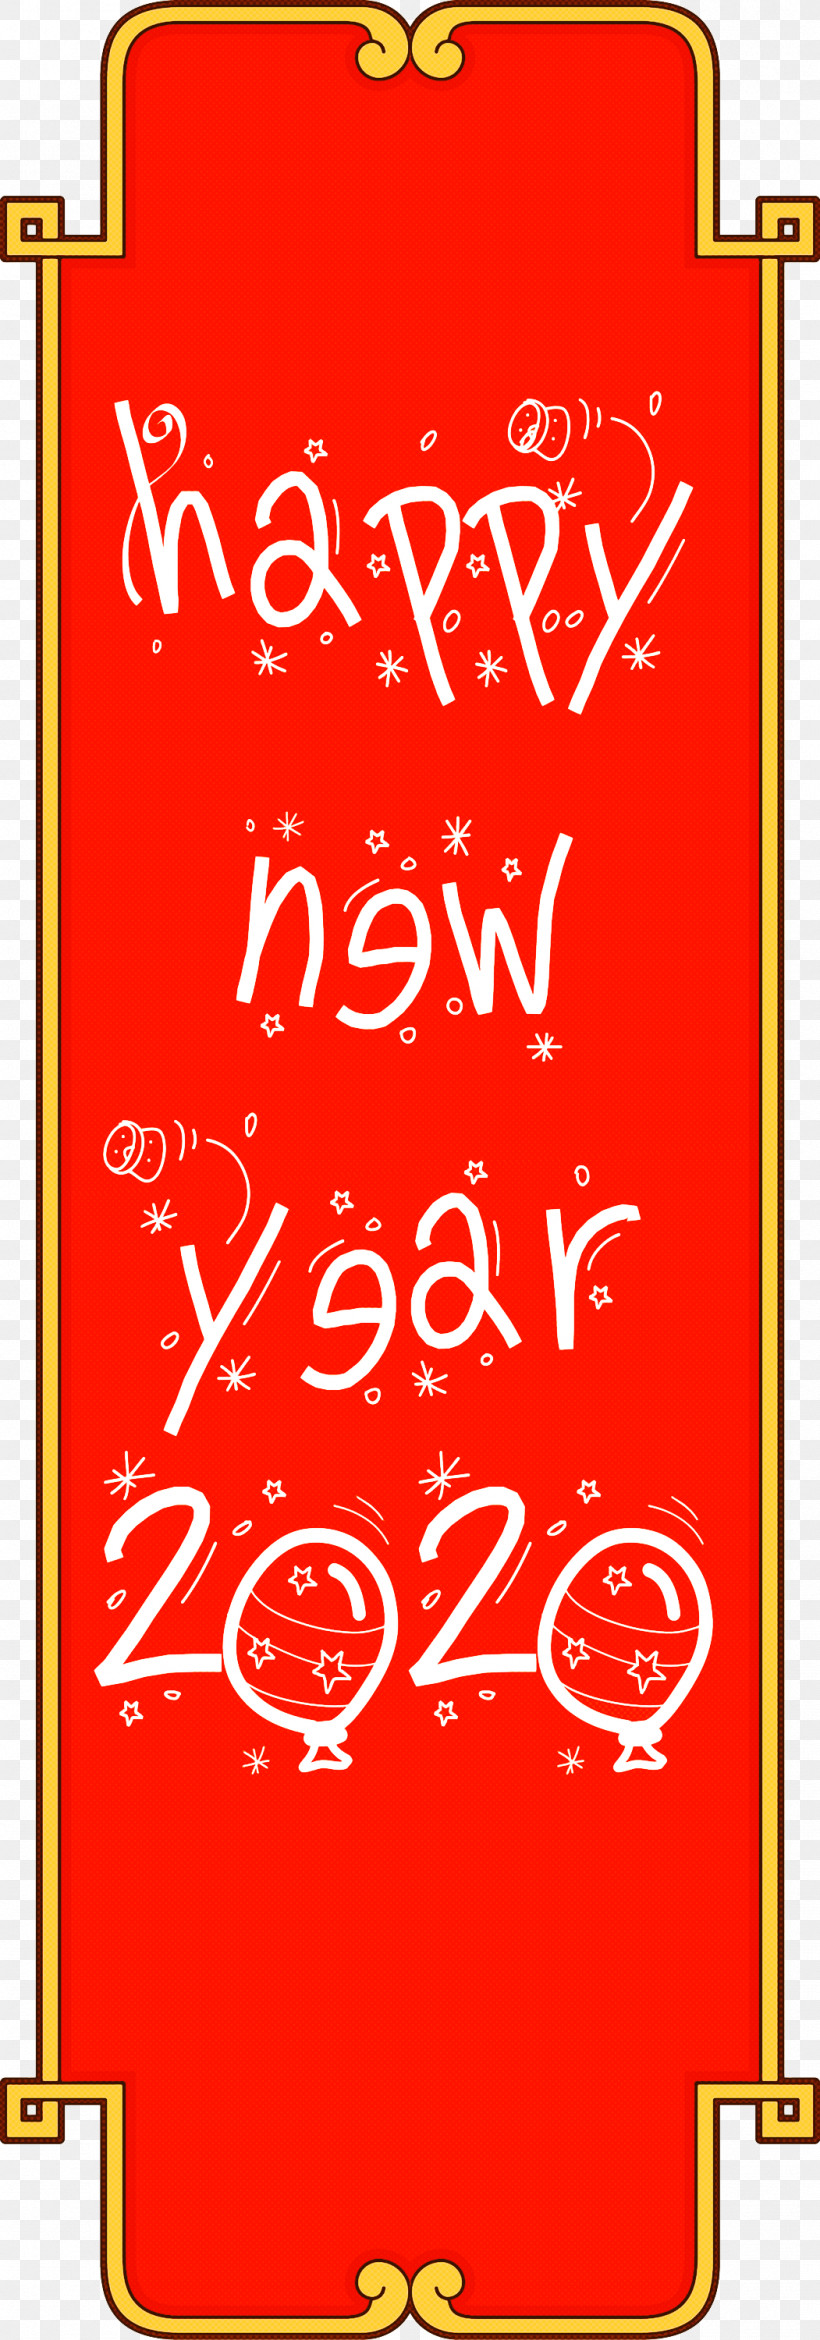 Happy New Year 2020 New Years 2020 2020, PNG, 1051x3000px, 2020, Happy New Year 2020, Calligraphy, New Years 2020, Poster Download Free